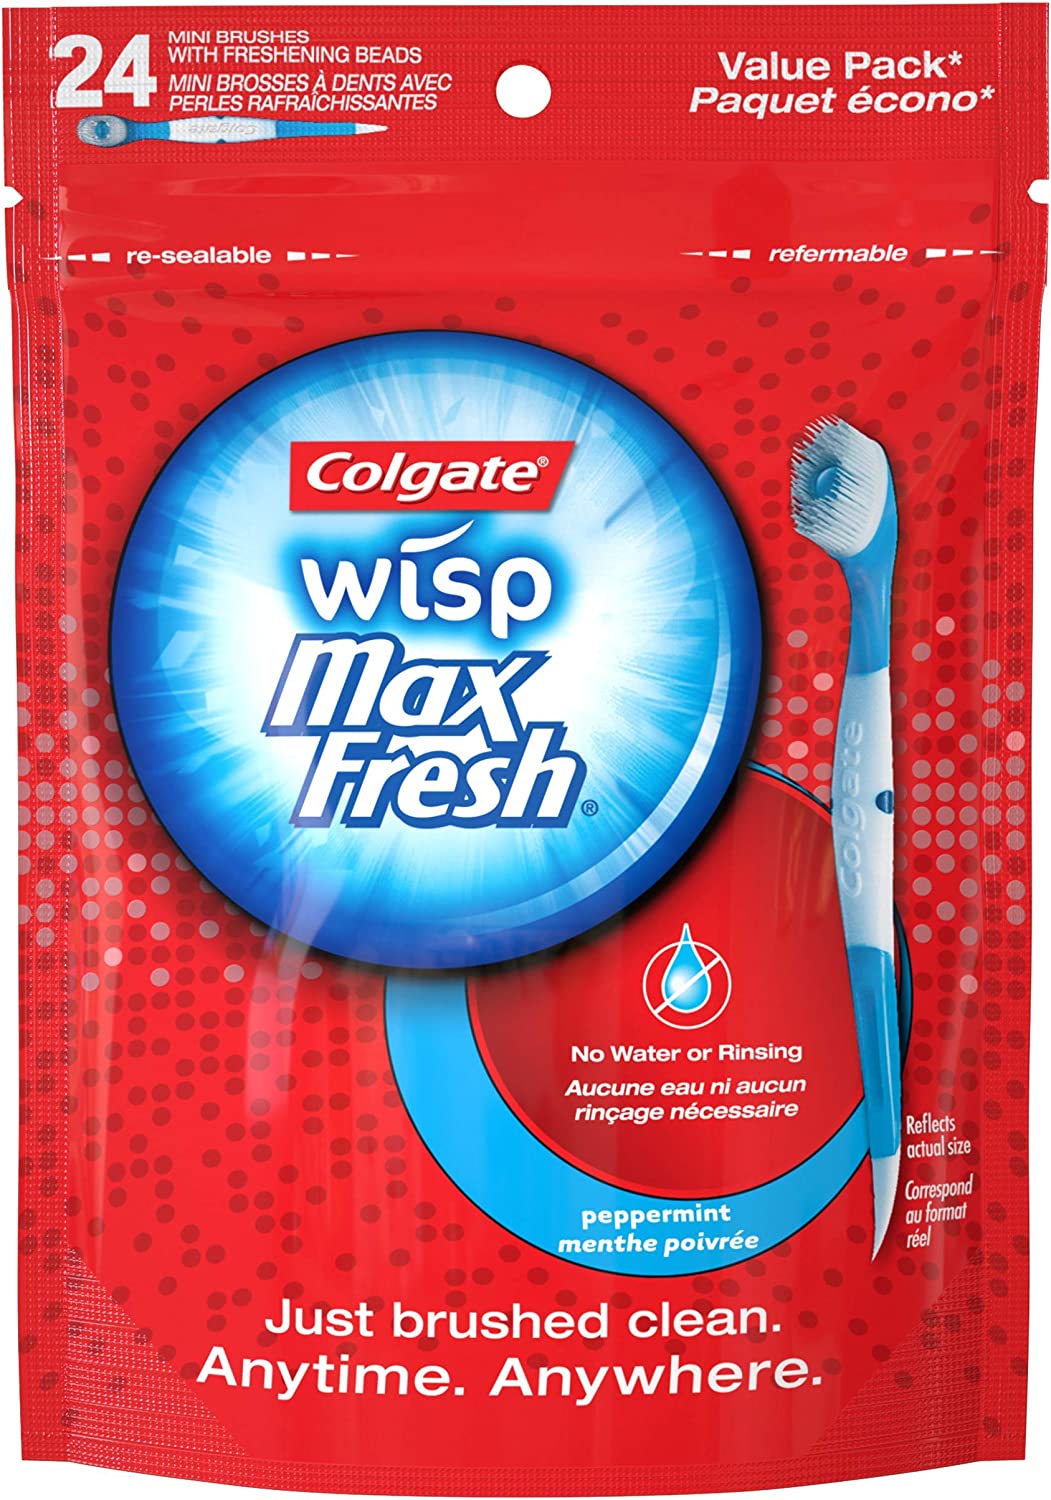 Colgate- MaxFresh Wisp Disposable Mini Toothbrush, Peppermint - 24 count (1 pack)